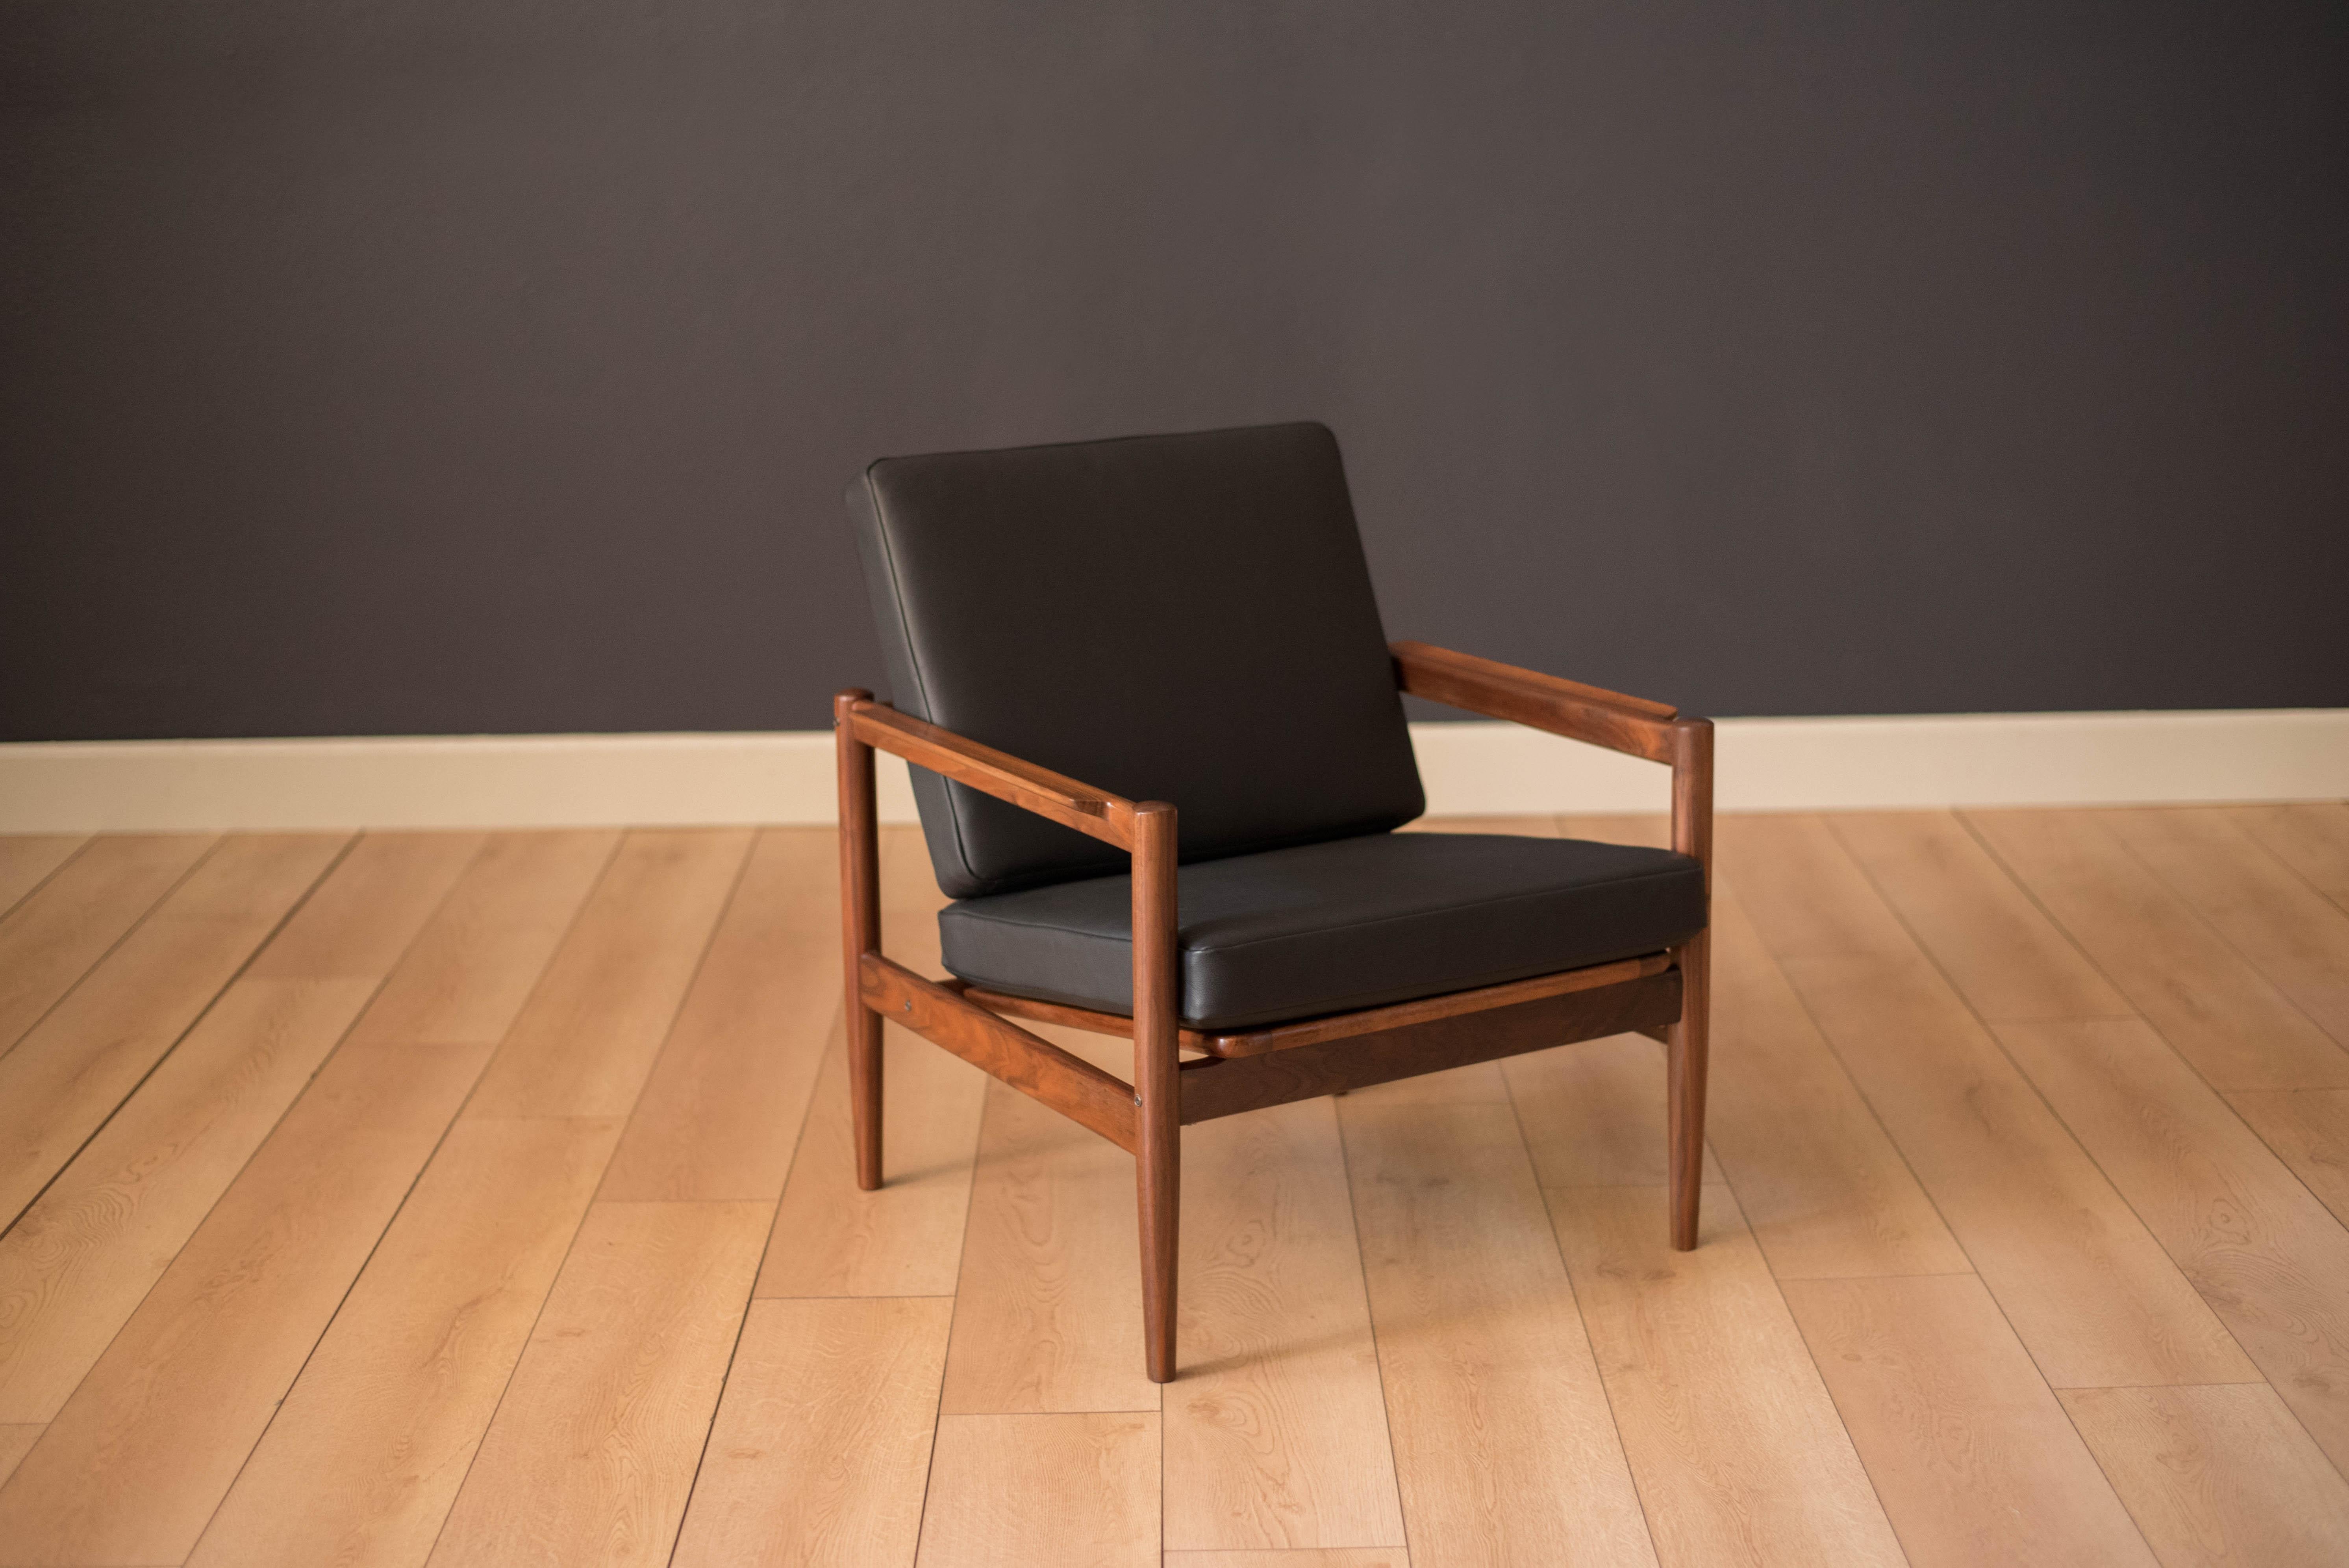 Vintage Danish lounge chair designed by Borge Jensen & Sonner for Bernstorffsminde Mobelfabrik. This lounge chair features a slatted backrest frame and sculpted walnut arms. Newly reupholstered in a matte black leather and includes two cushions.
